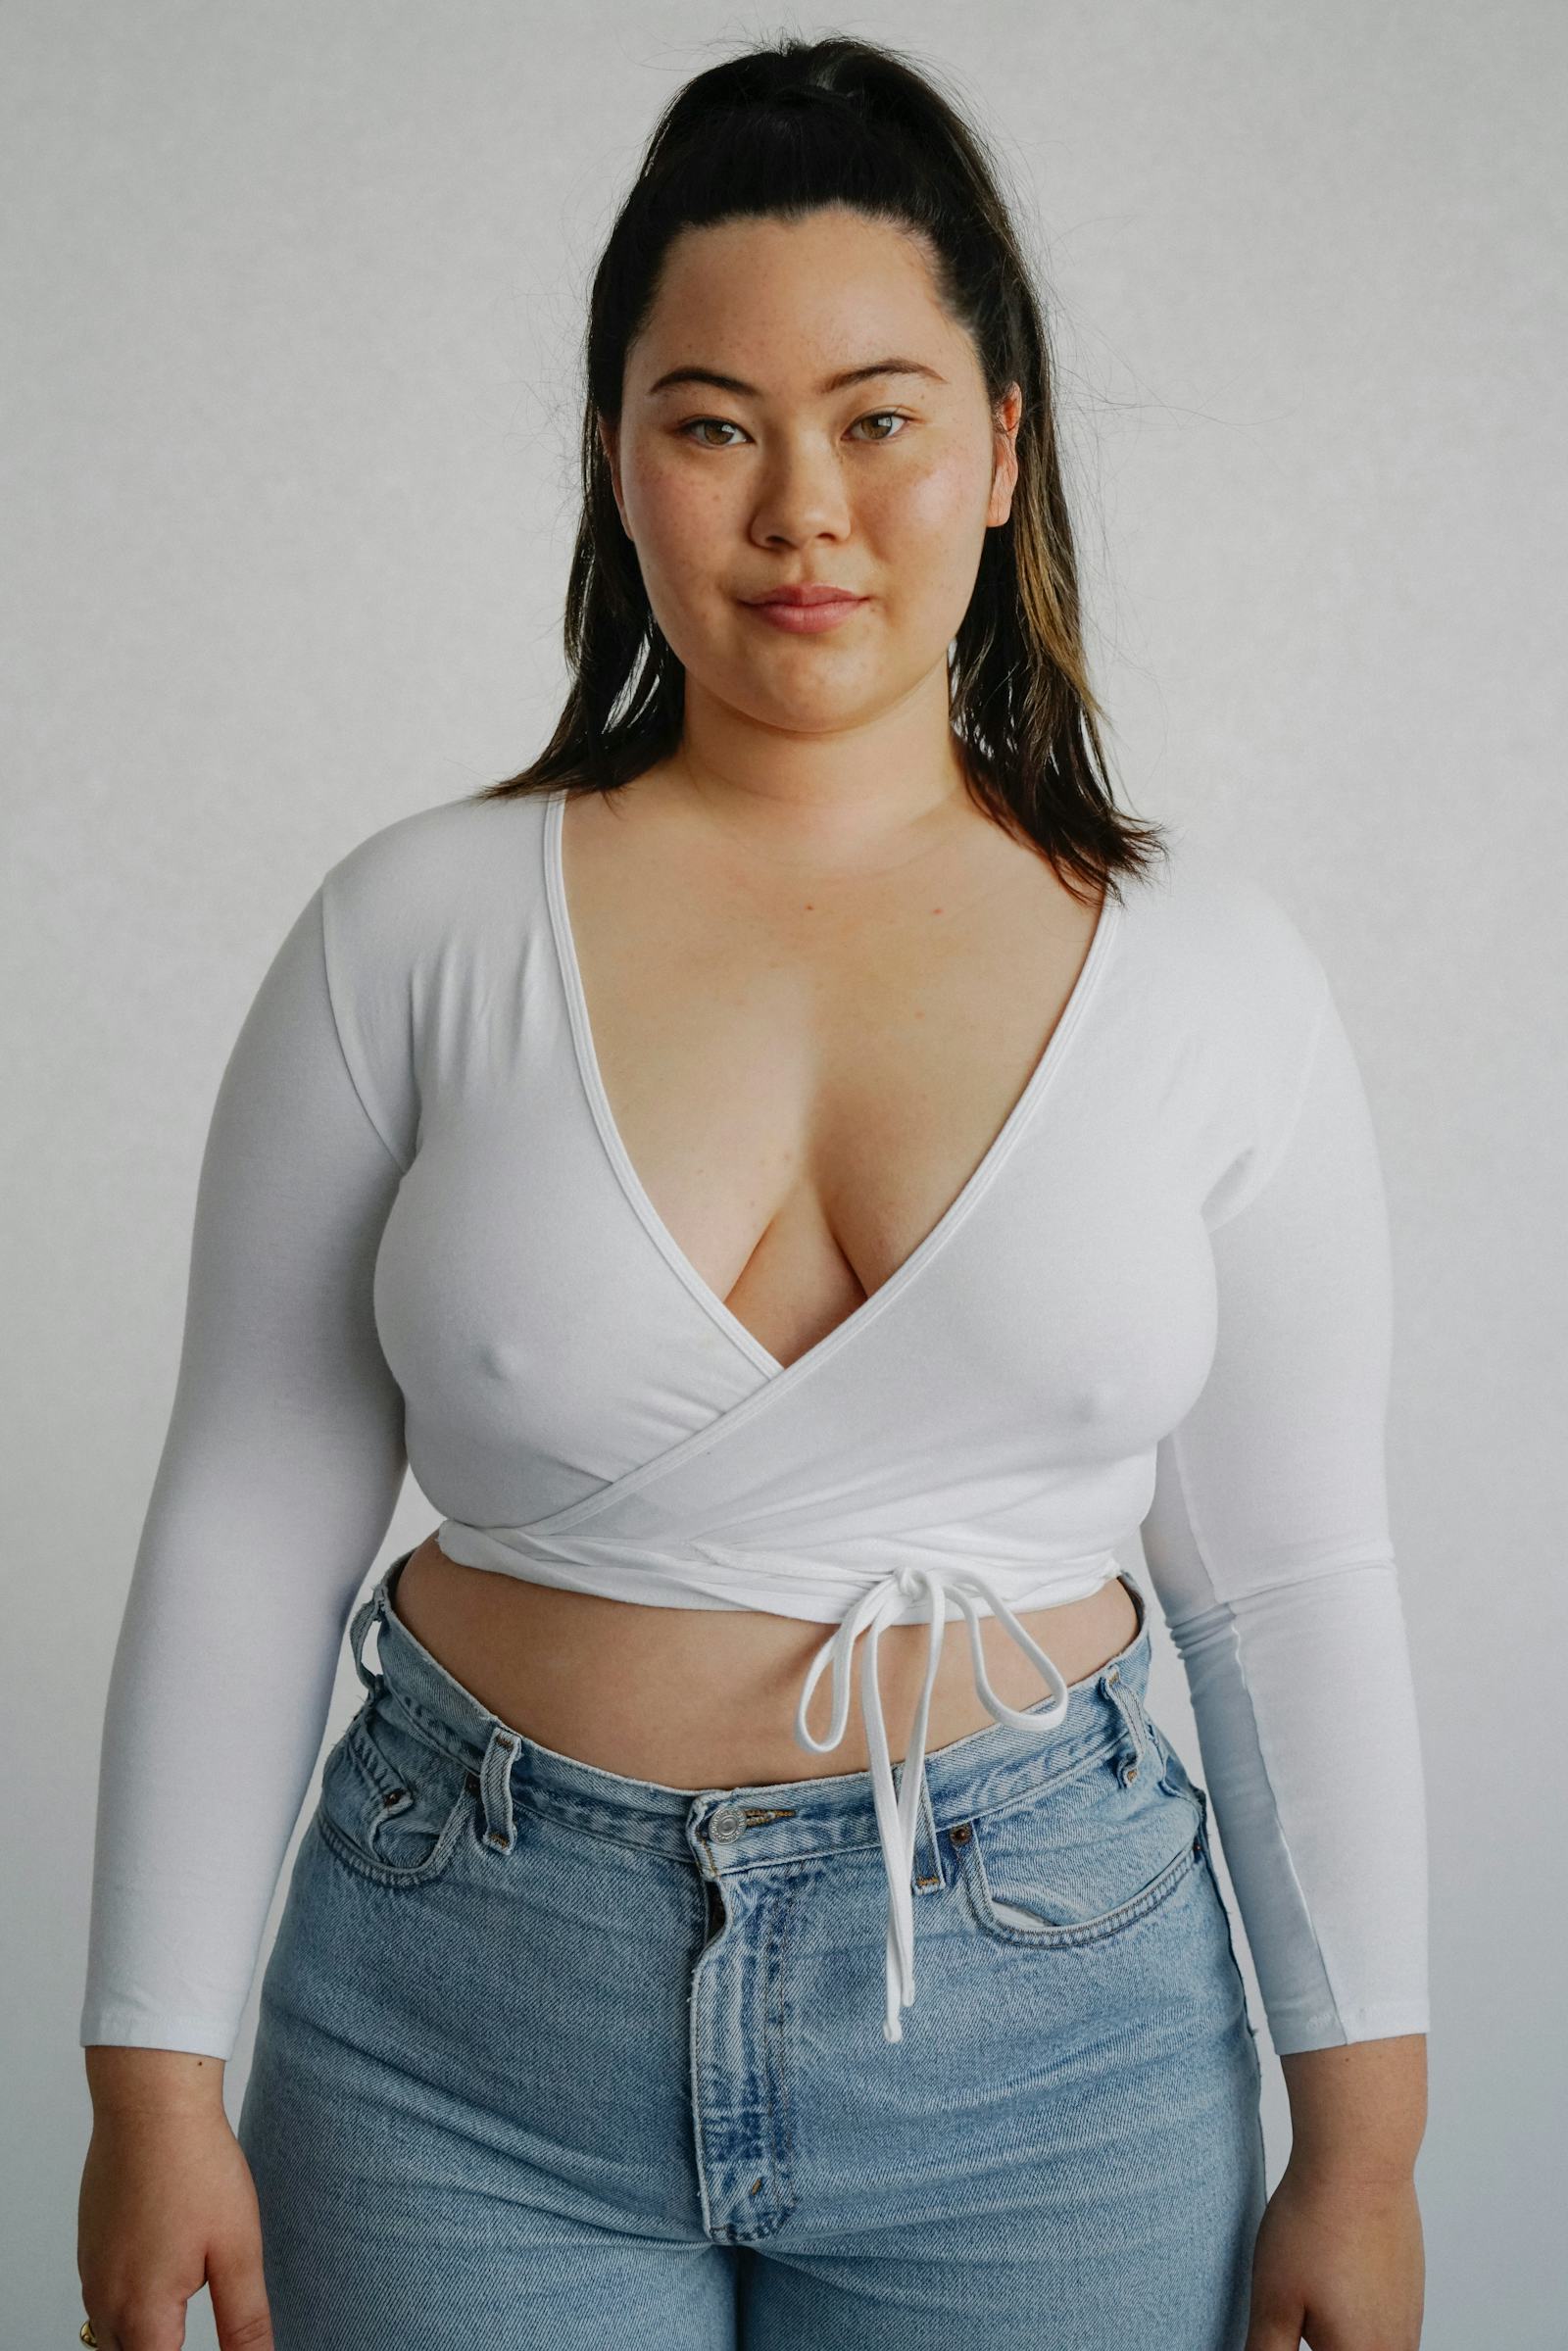 Plus Size Model Minami Gessel Wants To Inspire Other Asian Girls To Do